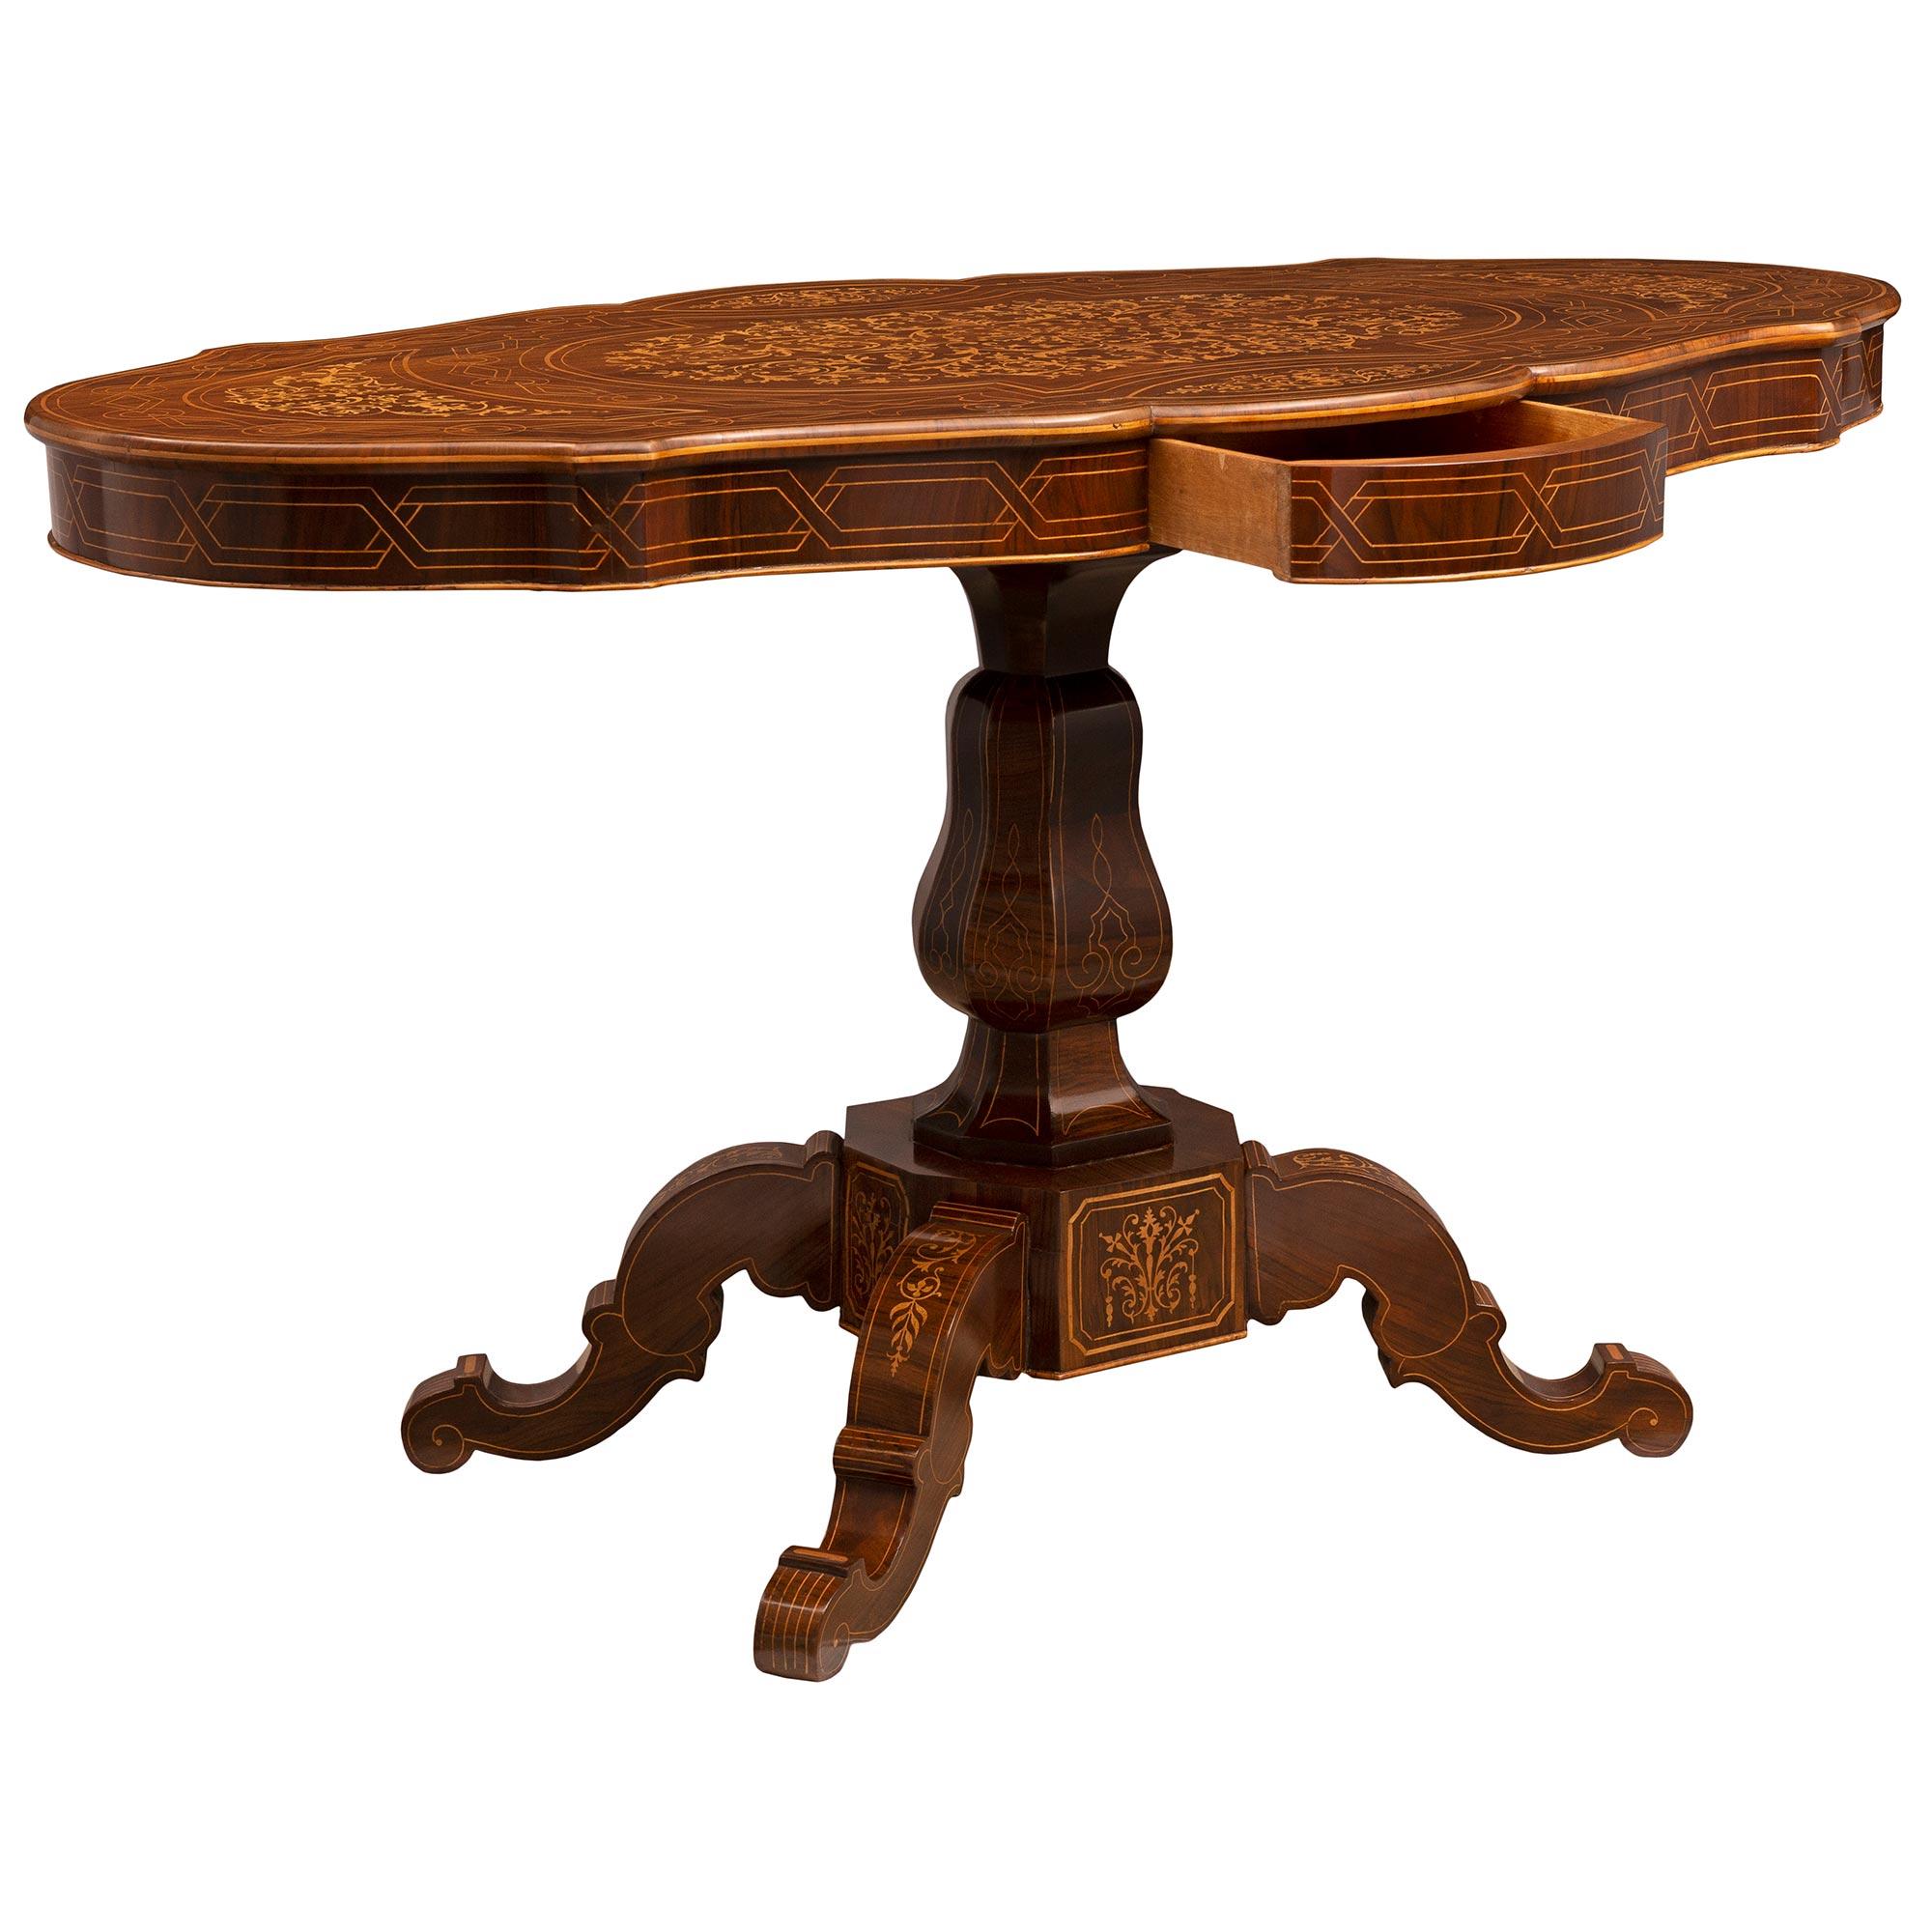 Italian 19th Century Charles X Period Walnut and Maplewood Inlaid Table For Sale 1